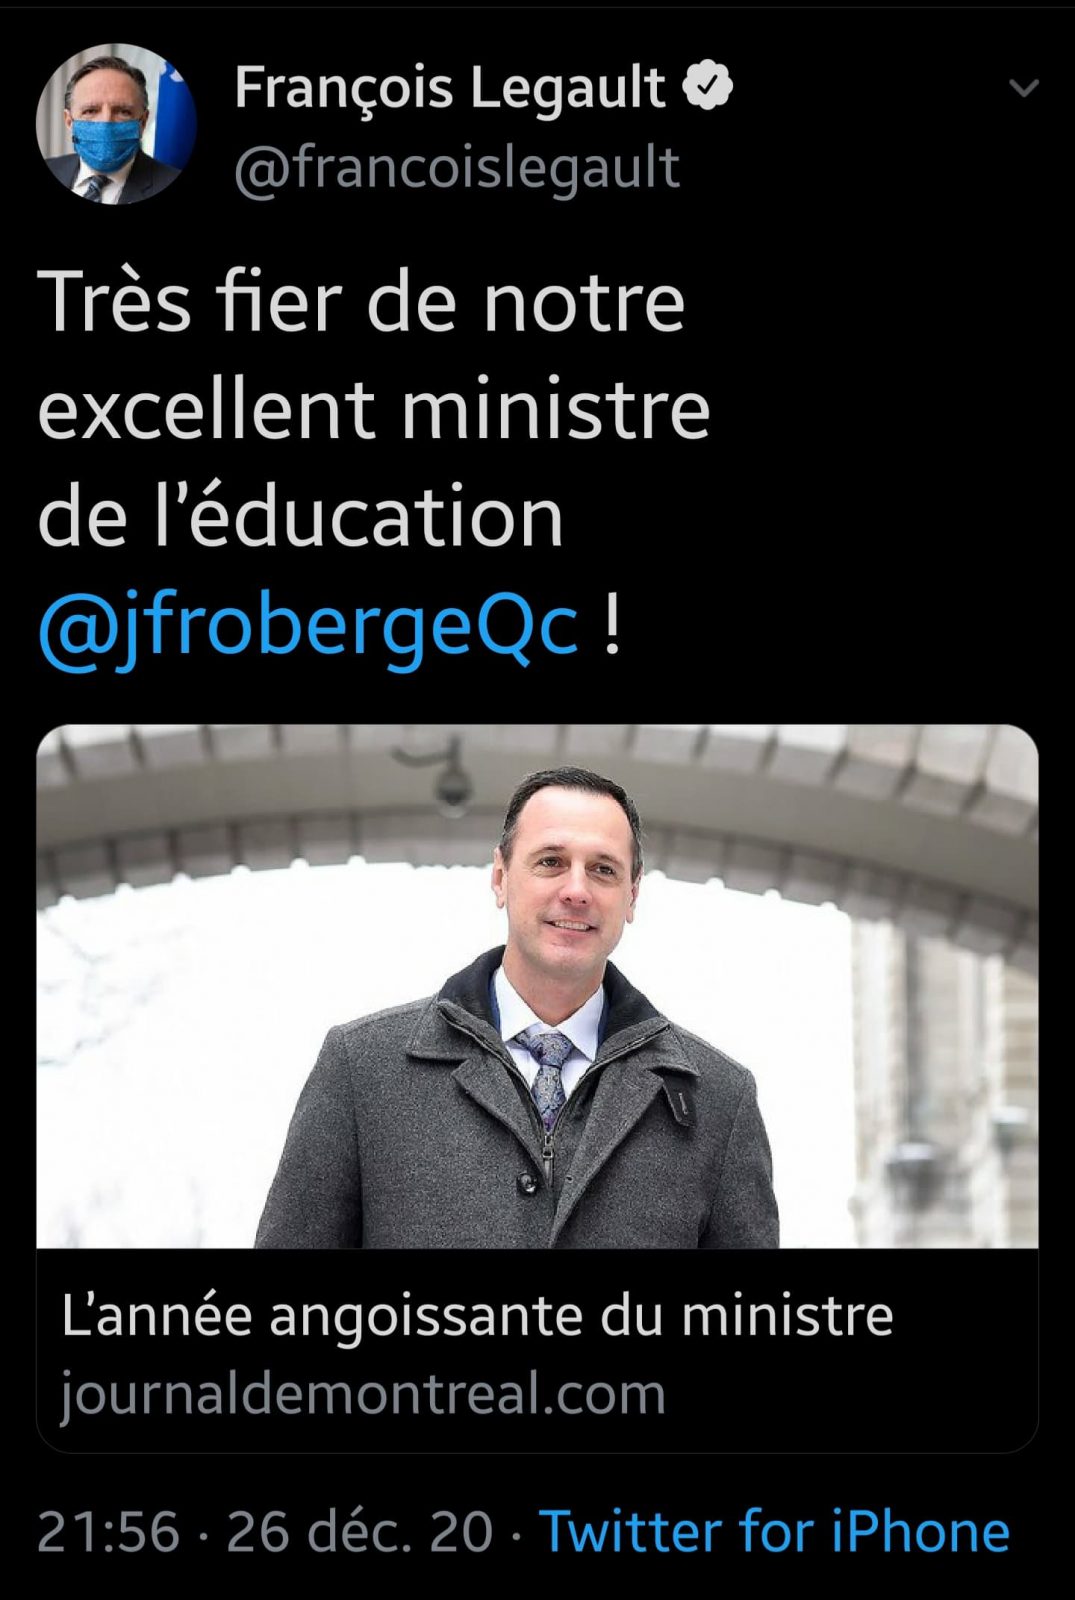 scolaire roberge